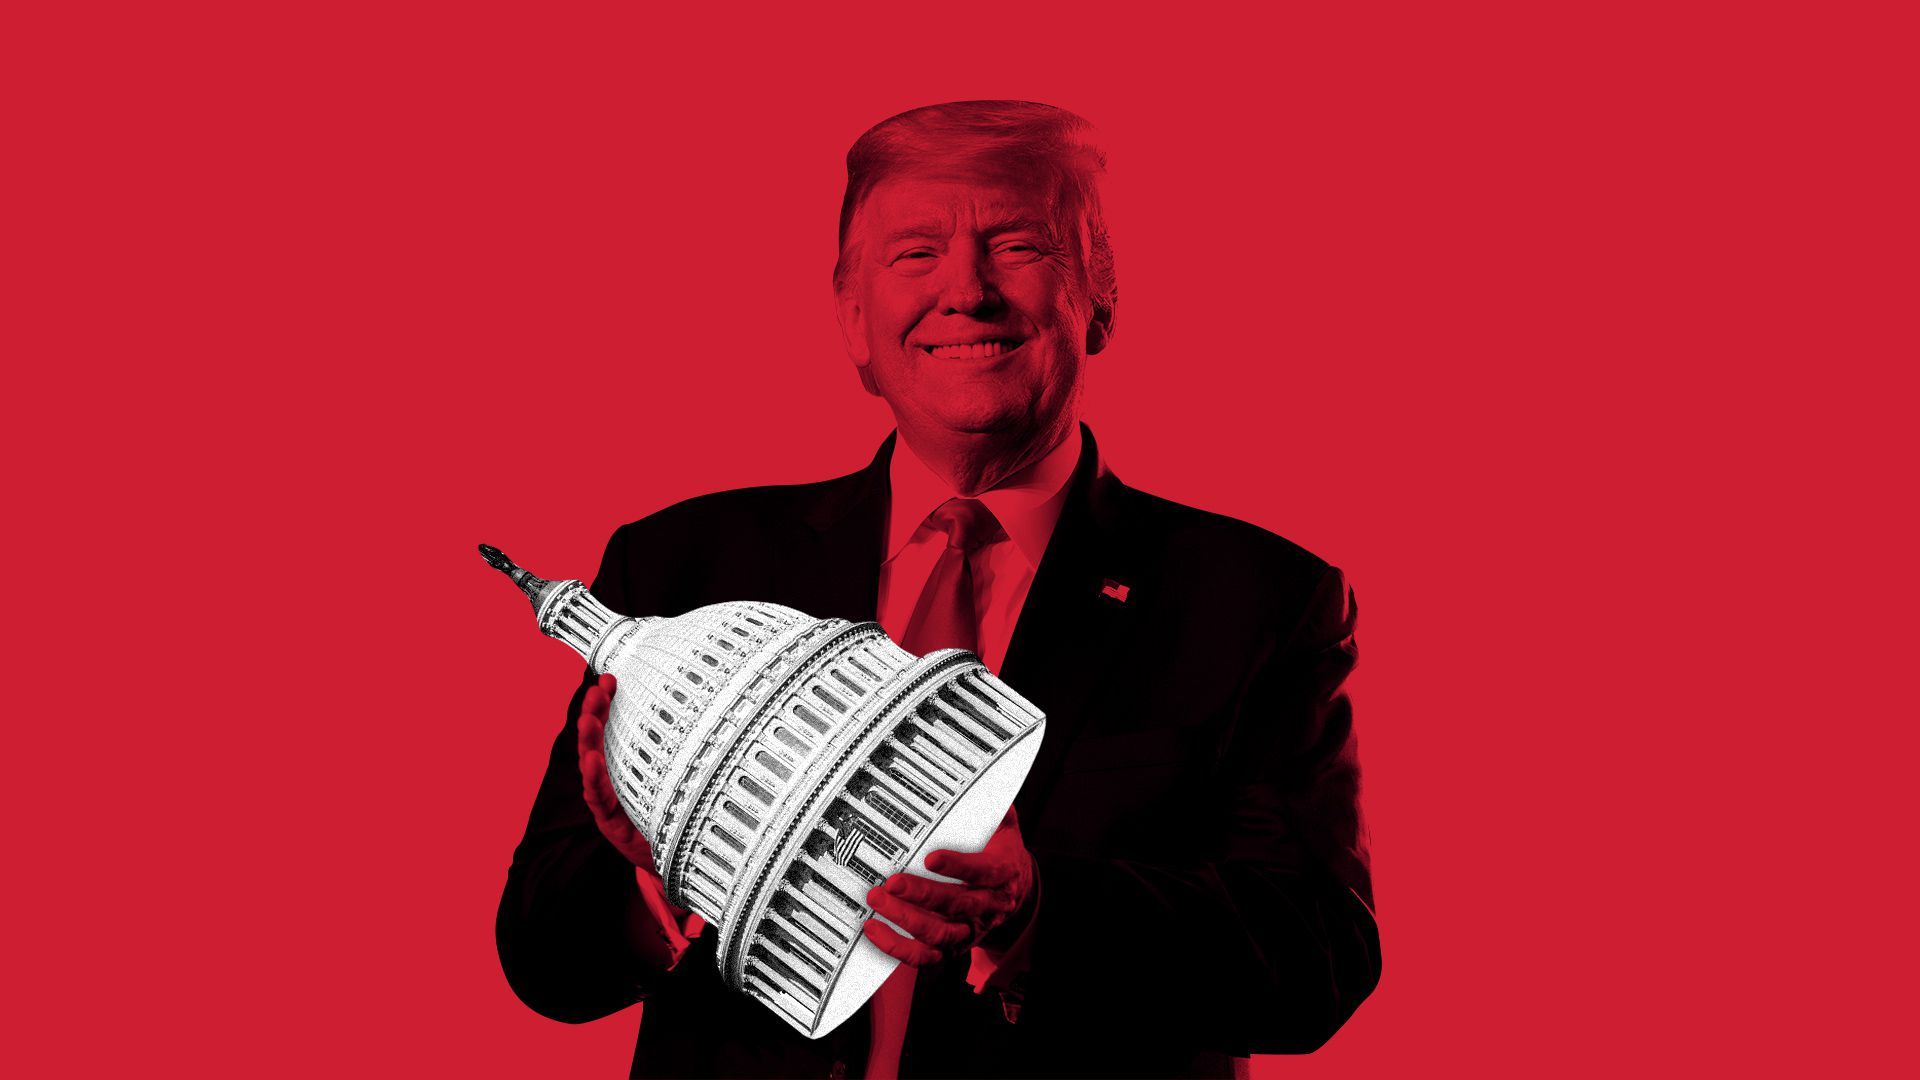 Illustration of Trump holding the Capitol Building dome